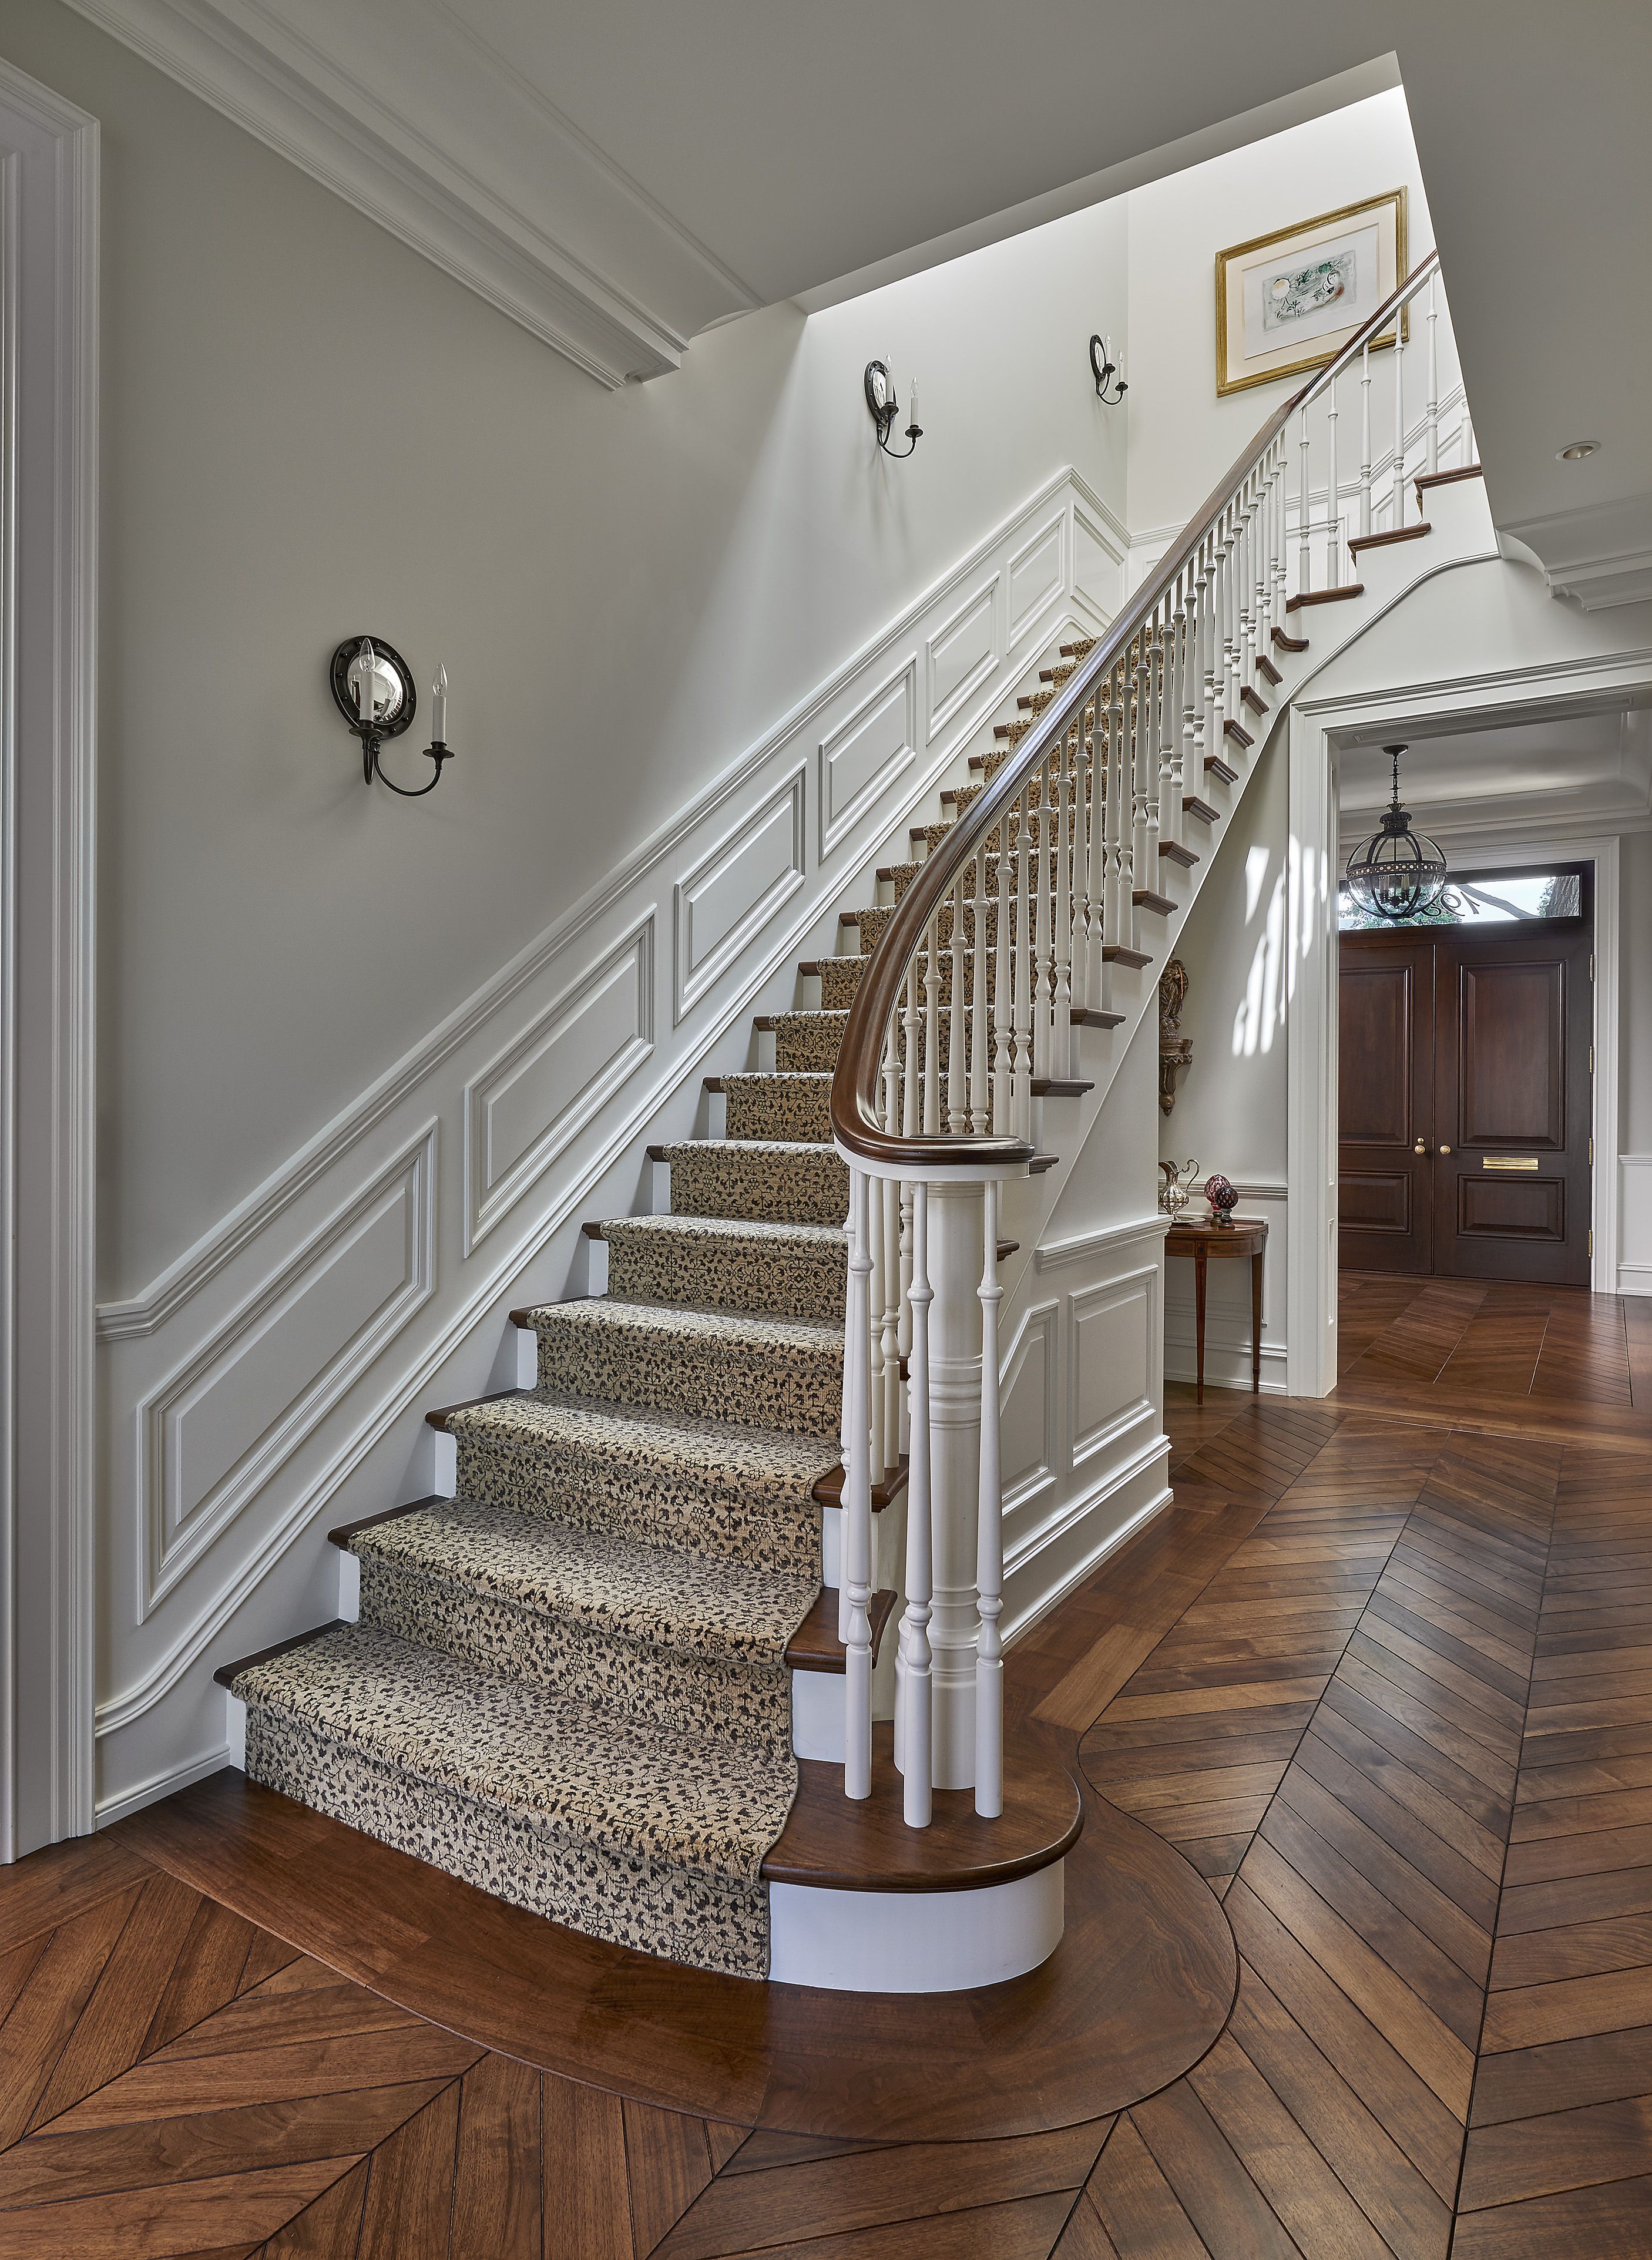 25 Stunning Carpeted Staircase Ideas, Hardwood Floors With Carpeted Stairs